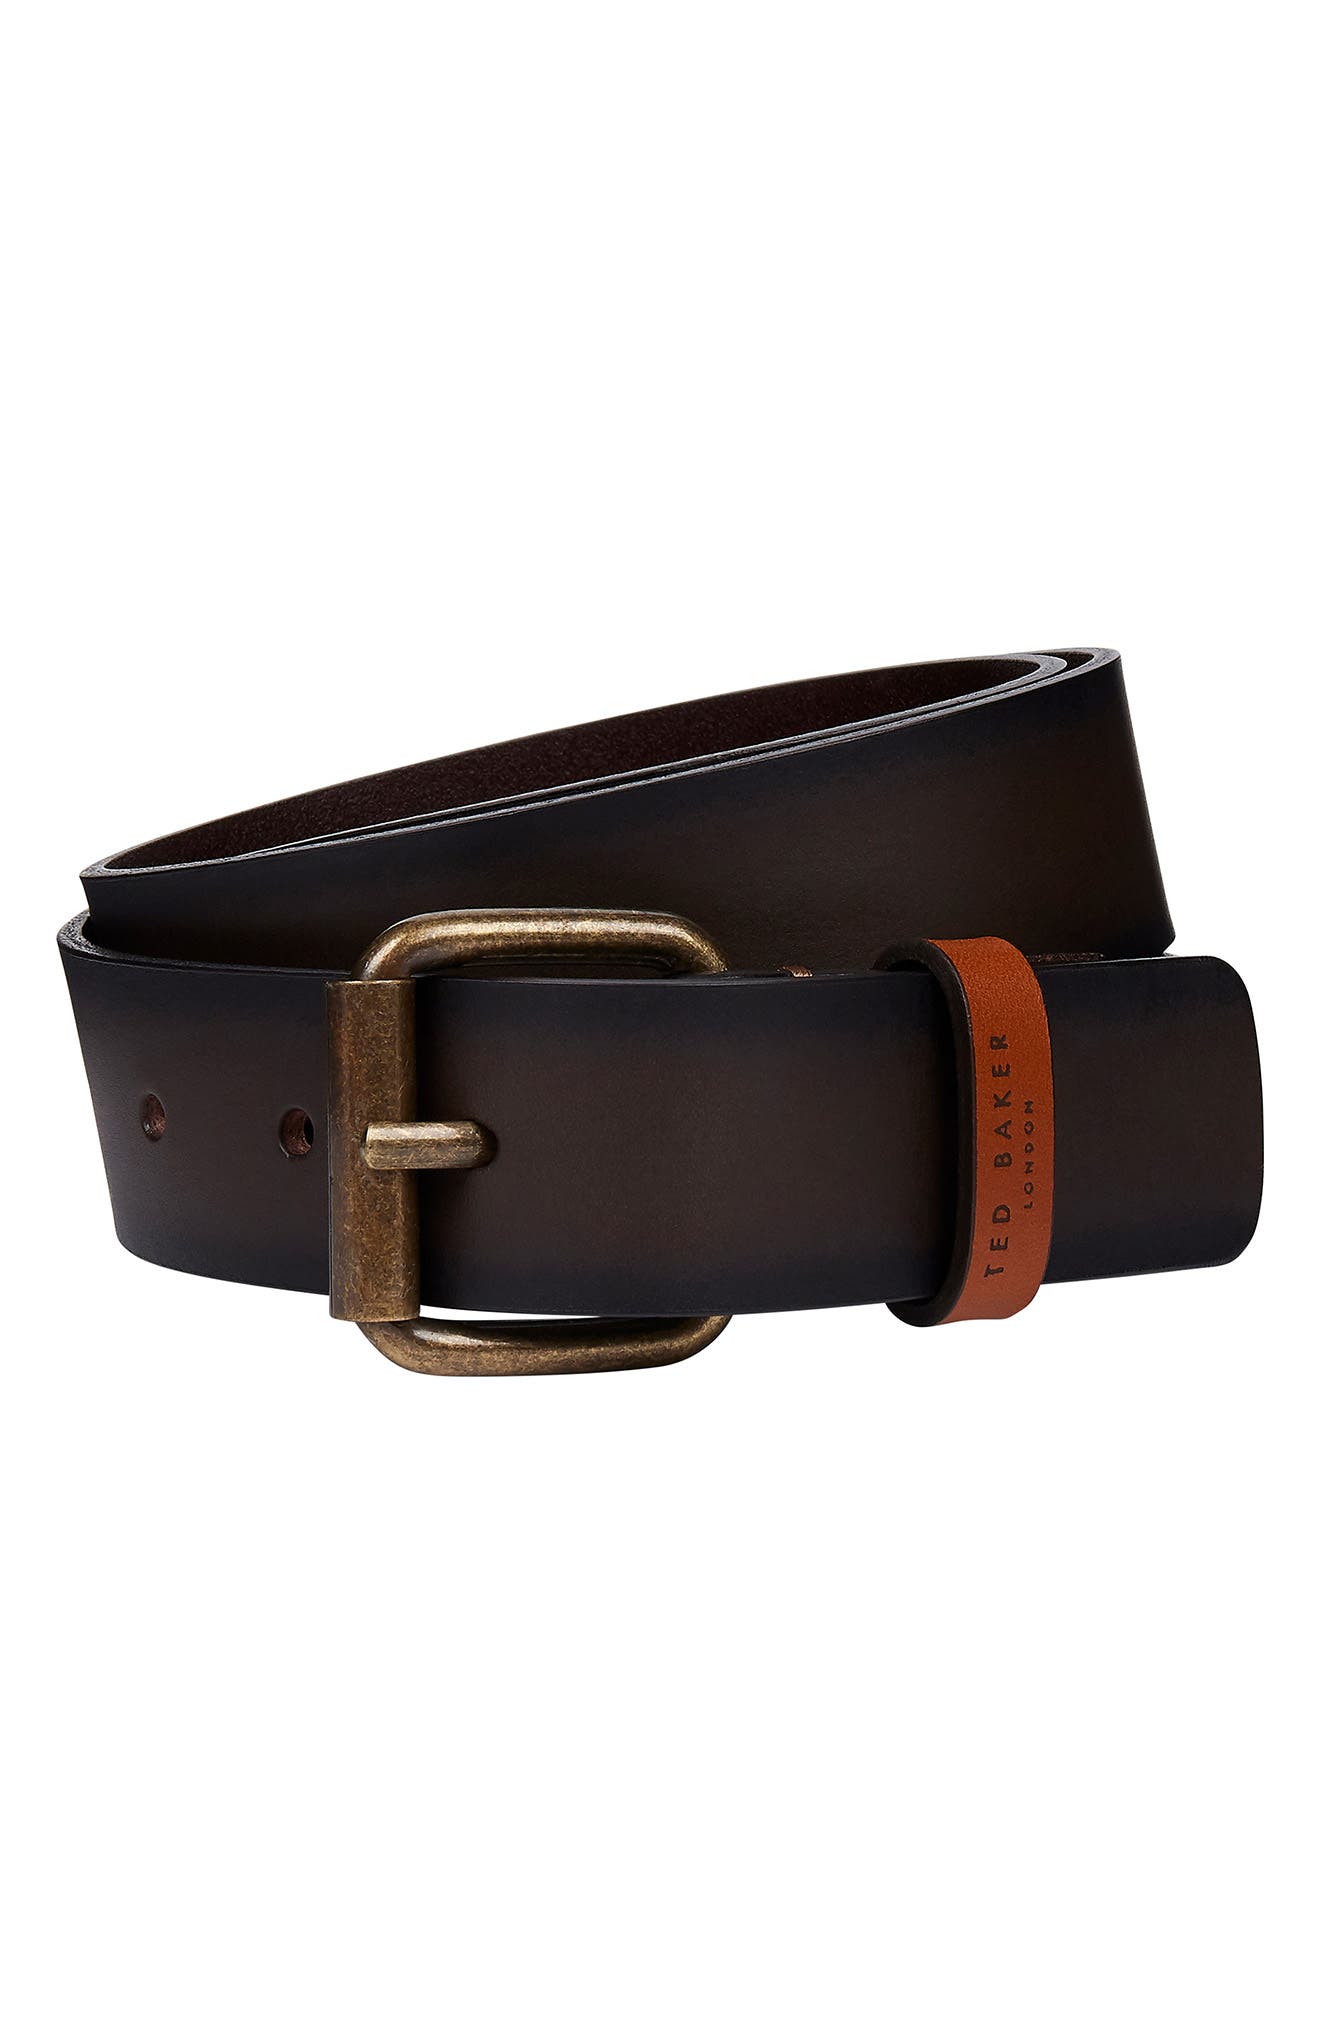 Ted Baker Mens Leather Belt Reversible Brown & Tan Silver Buckle W32-36